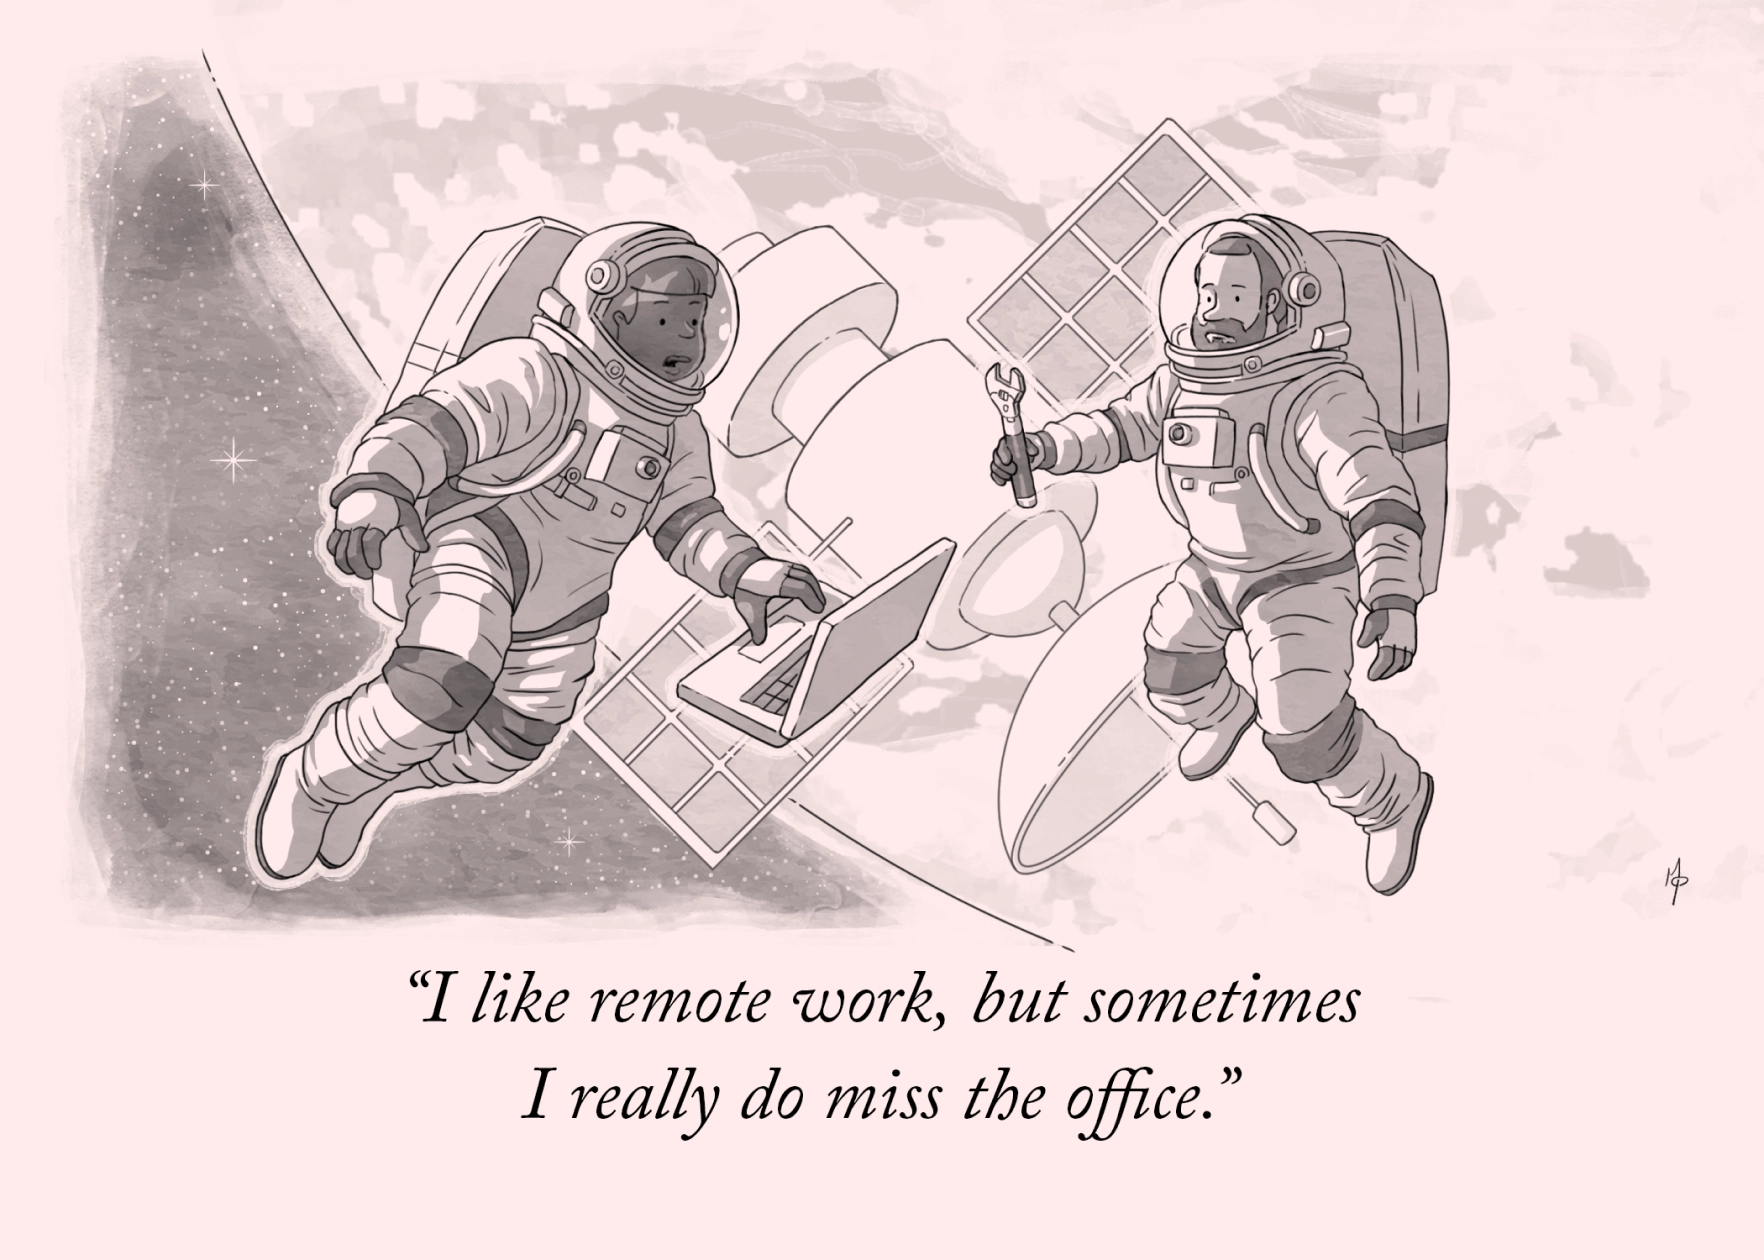 A cartoon-style illustration of a woman using a laptop and a man holding a wrench. They are both in spacesuits and fixing a satellite hovering in outer space. The woman says: I like remote work, but sometimes I really do miss the office.